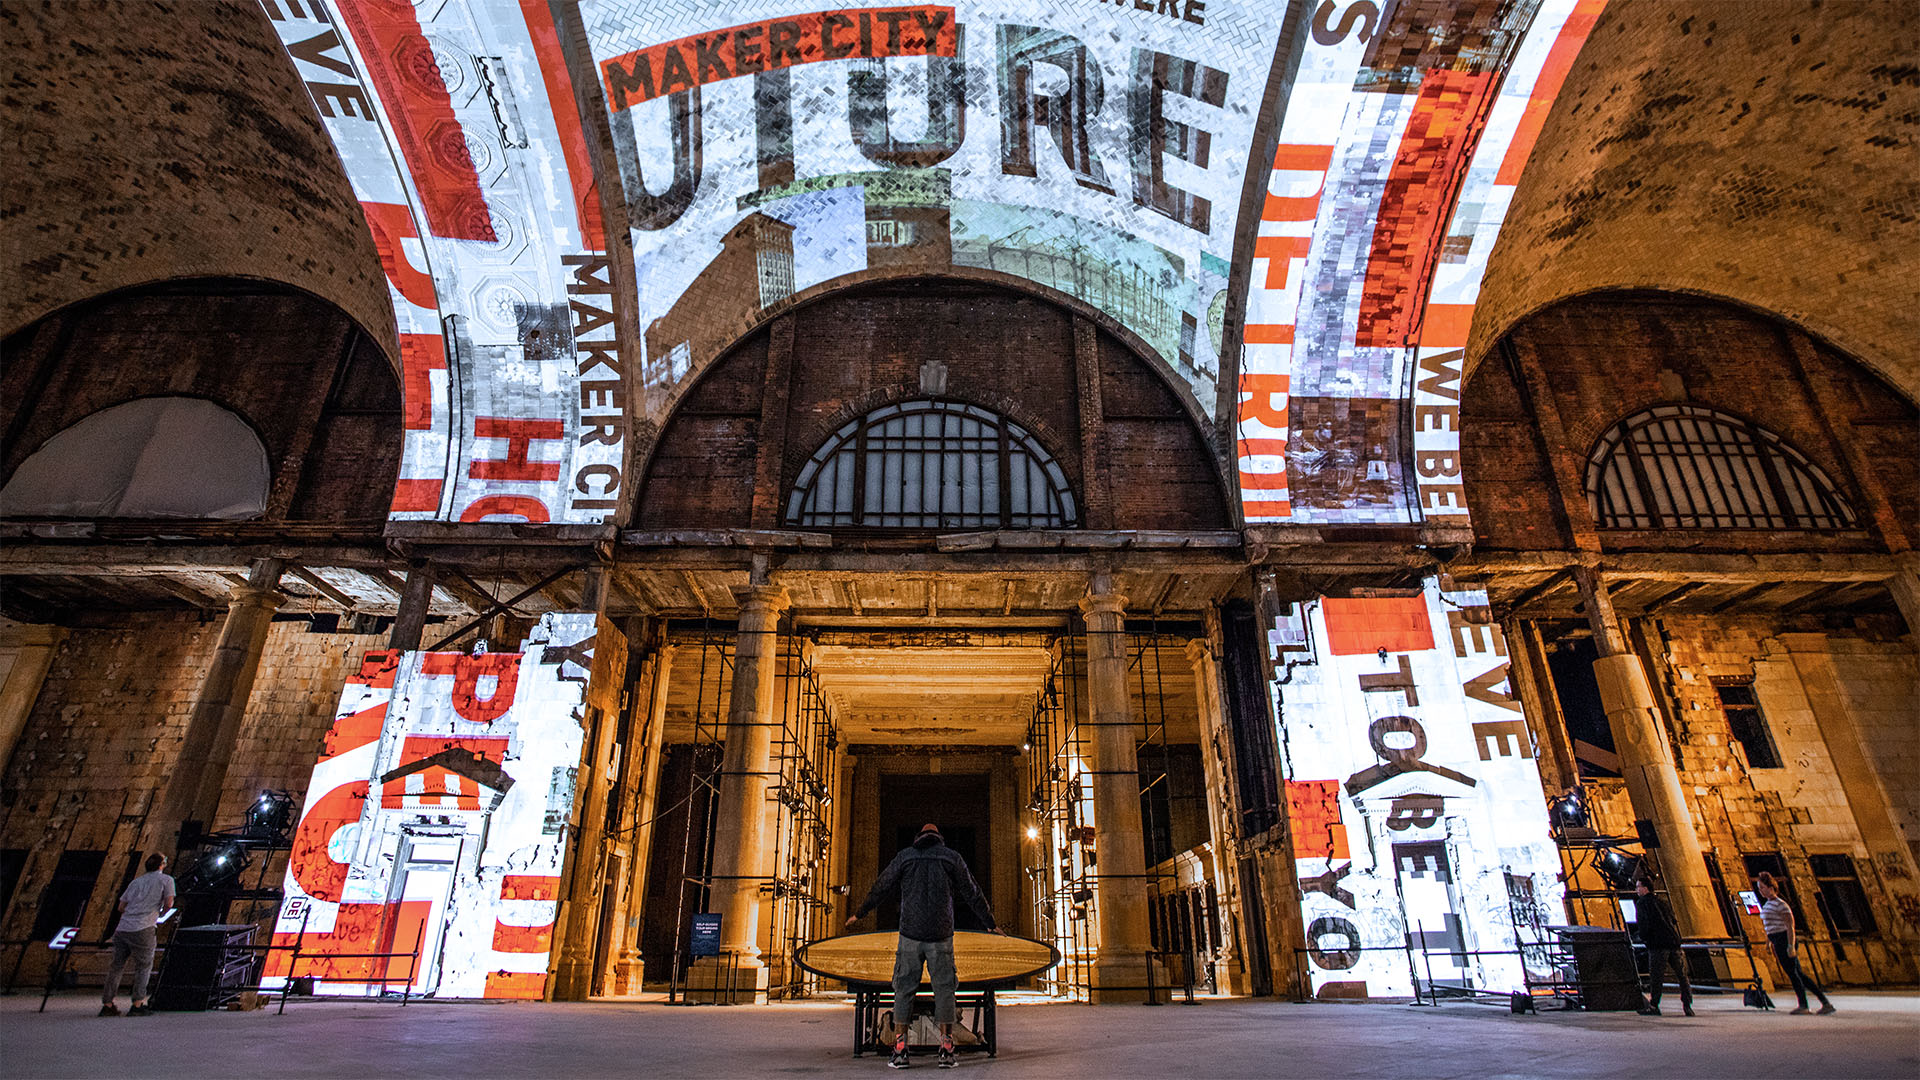 For Detroit is an interactive art installation and interior experience by Red Paper Heart for The Open House, Ford’s announcement of the purchase and future renovation of Michigan Central Station